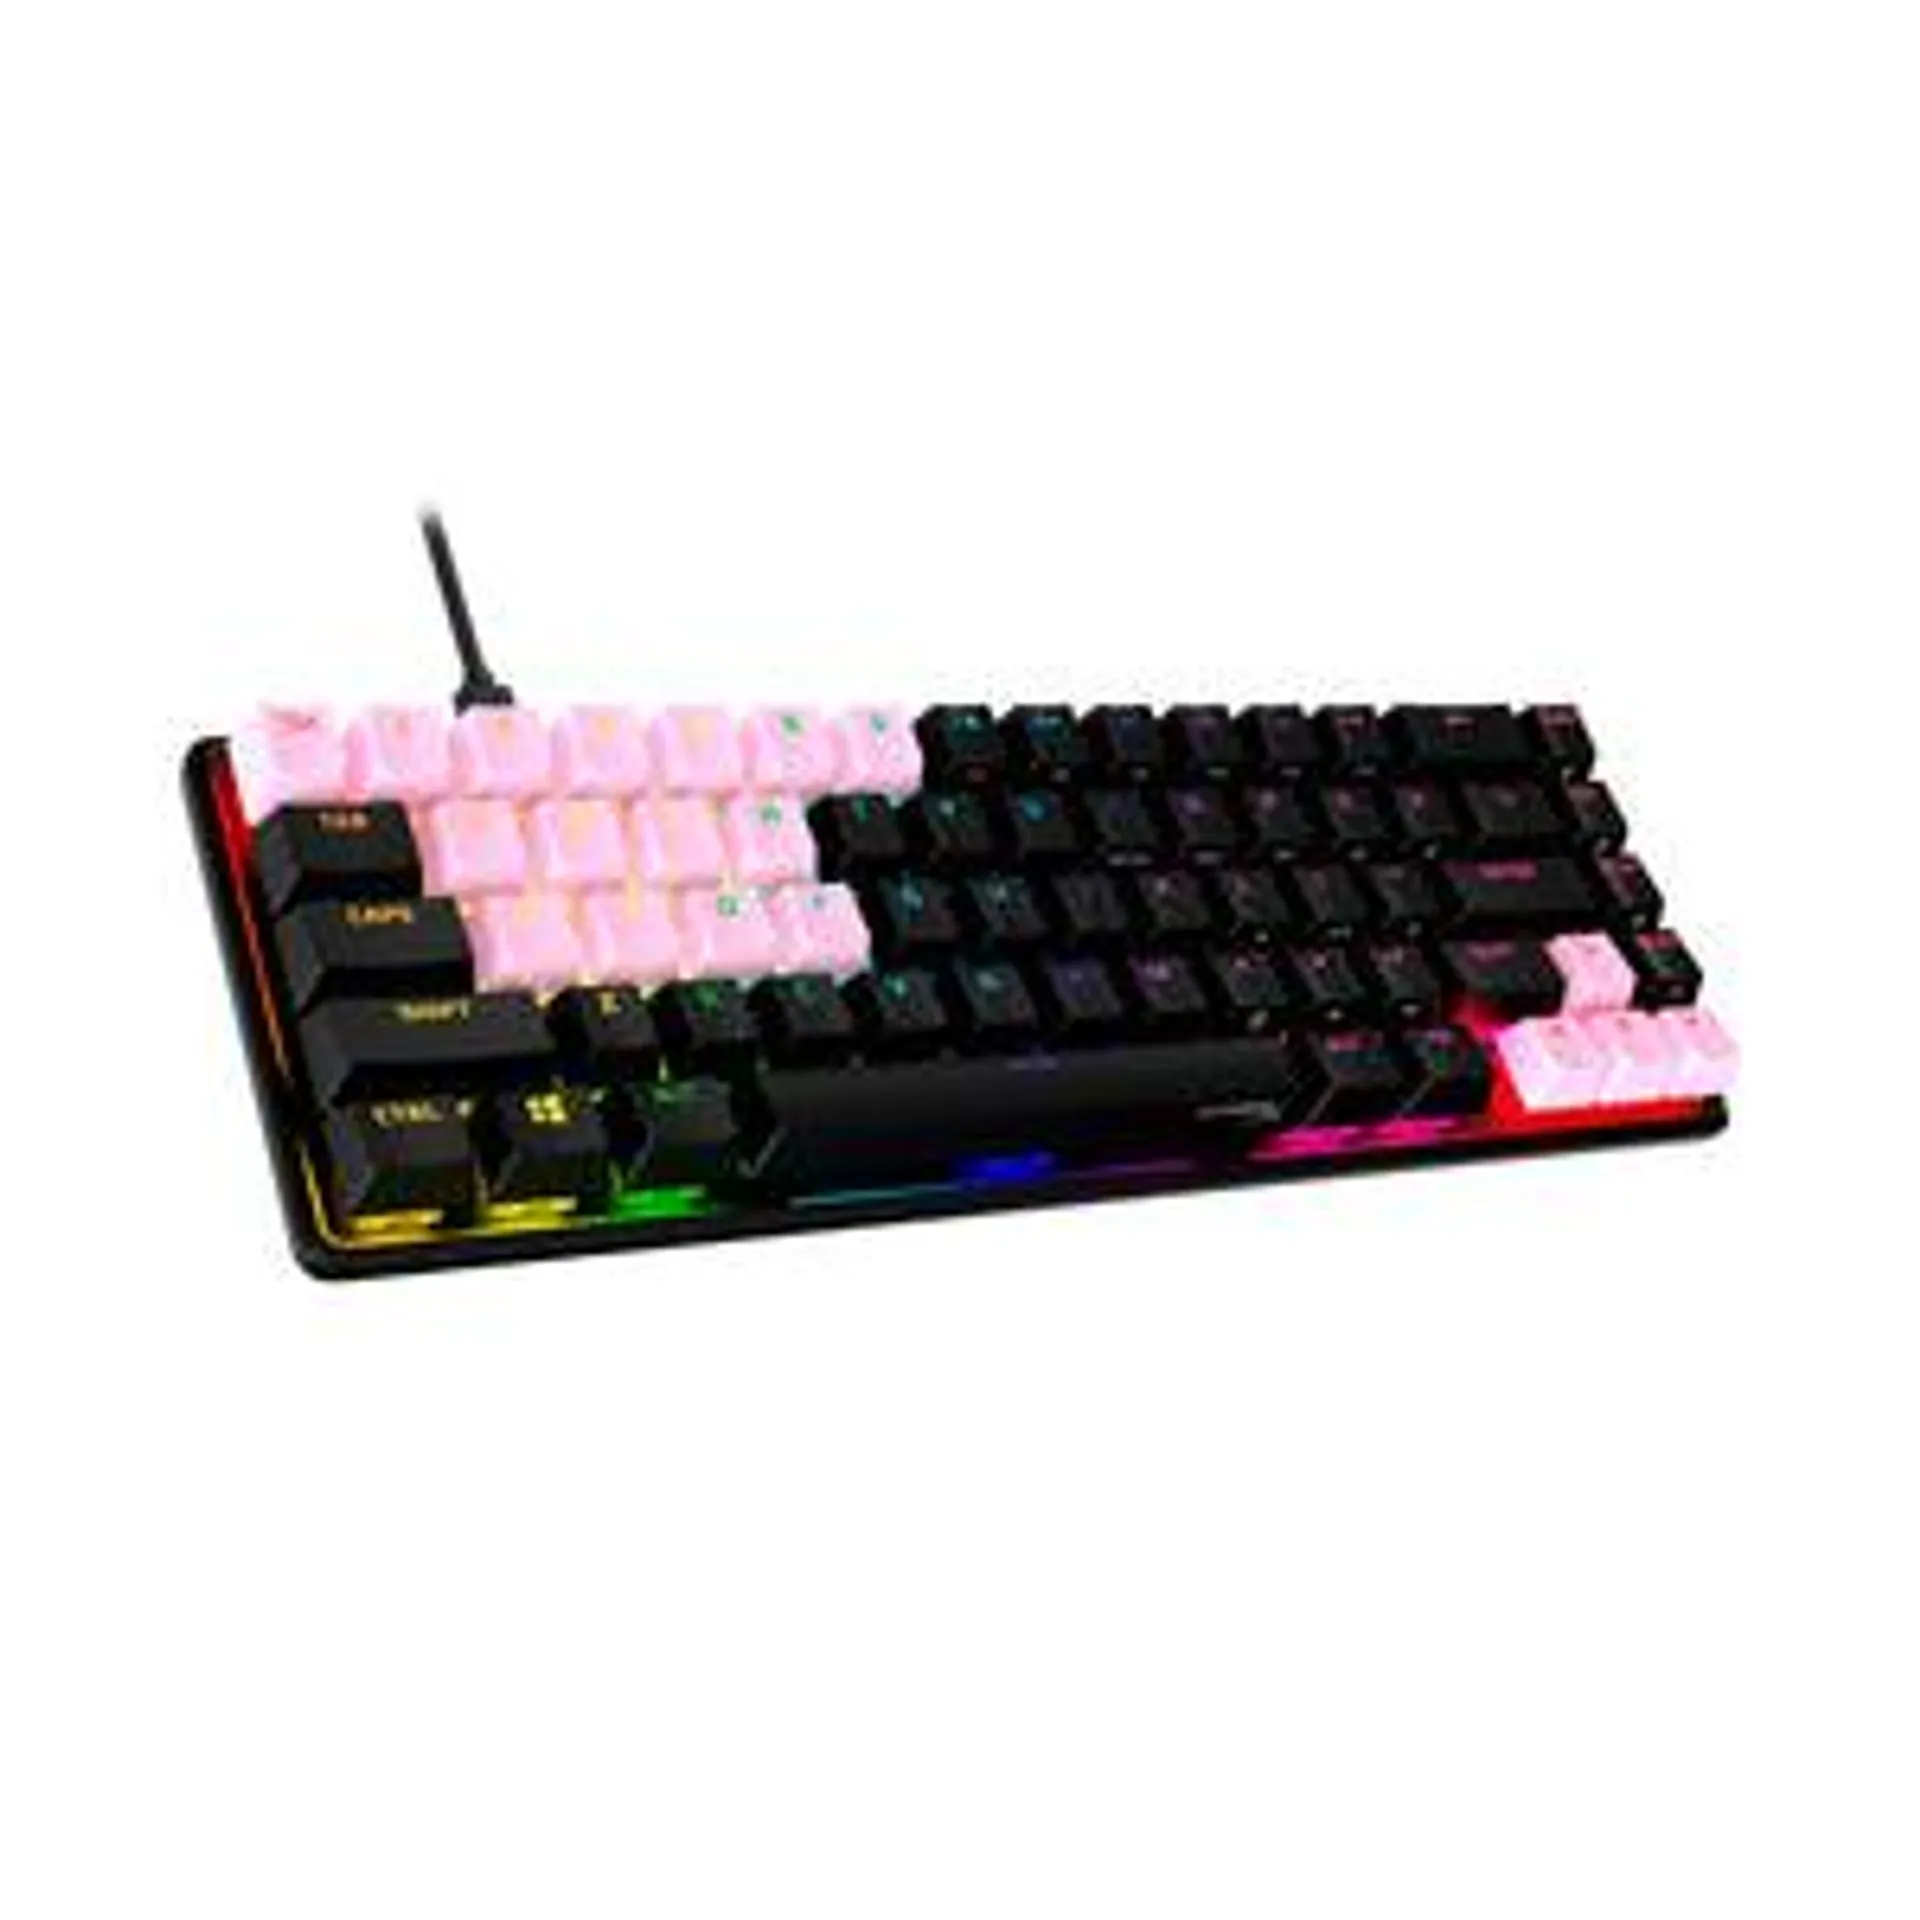 HyperX Rubber Keycaps - Gaming Accessory Kit